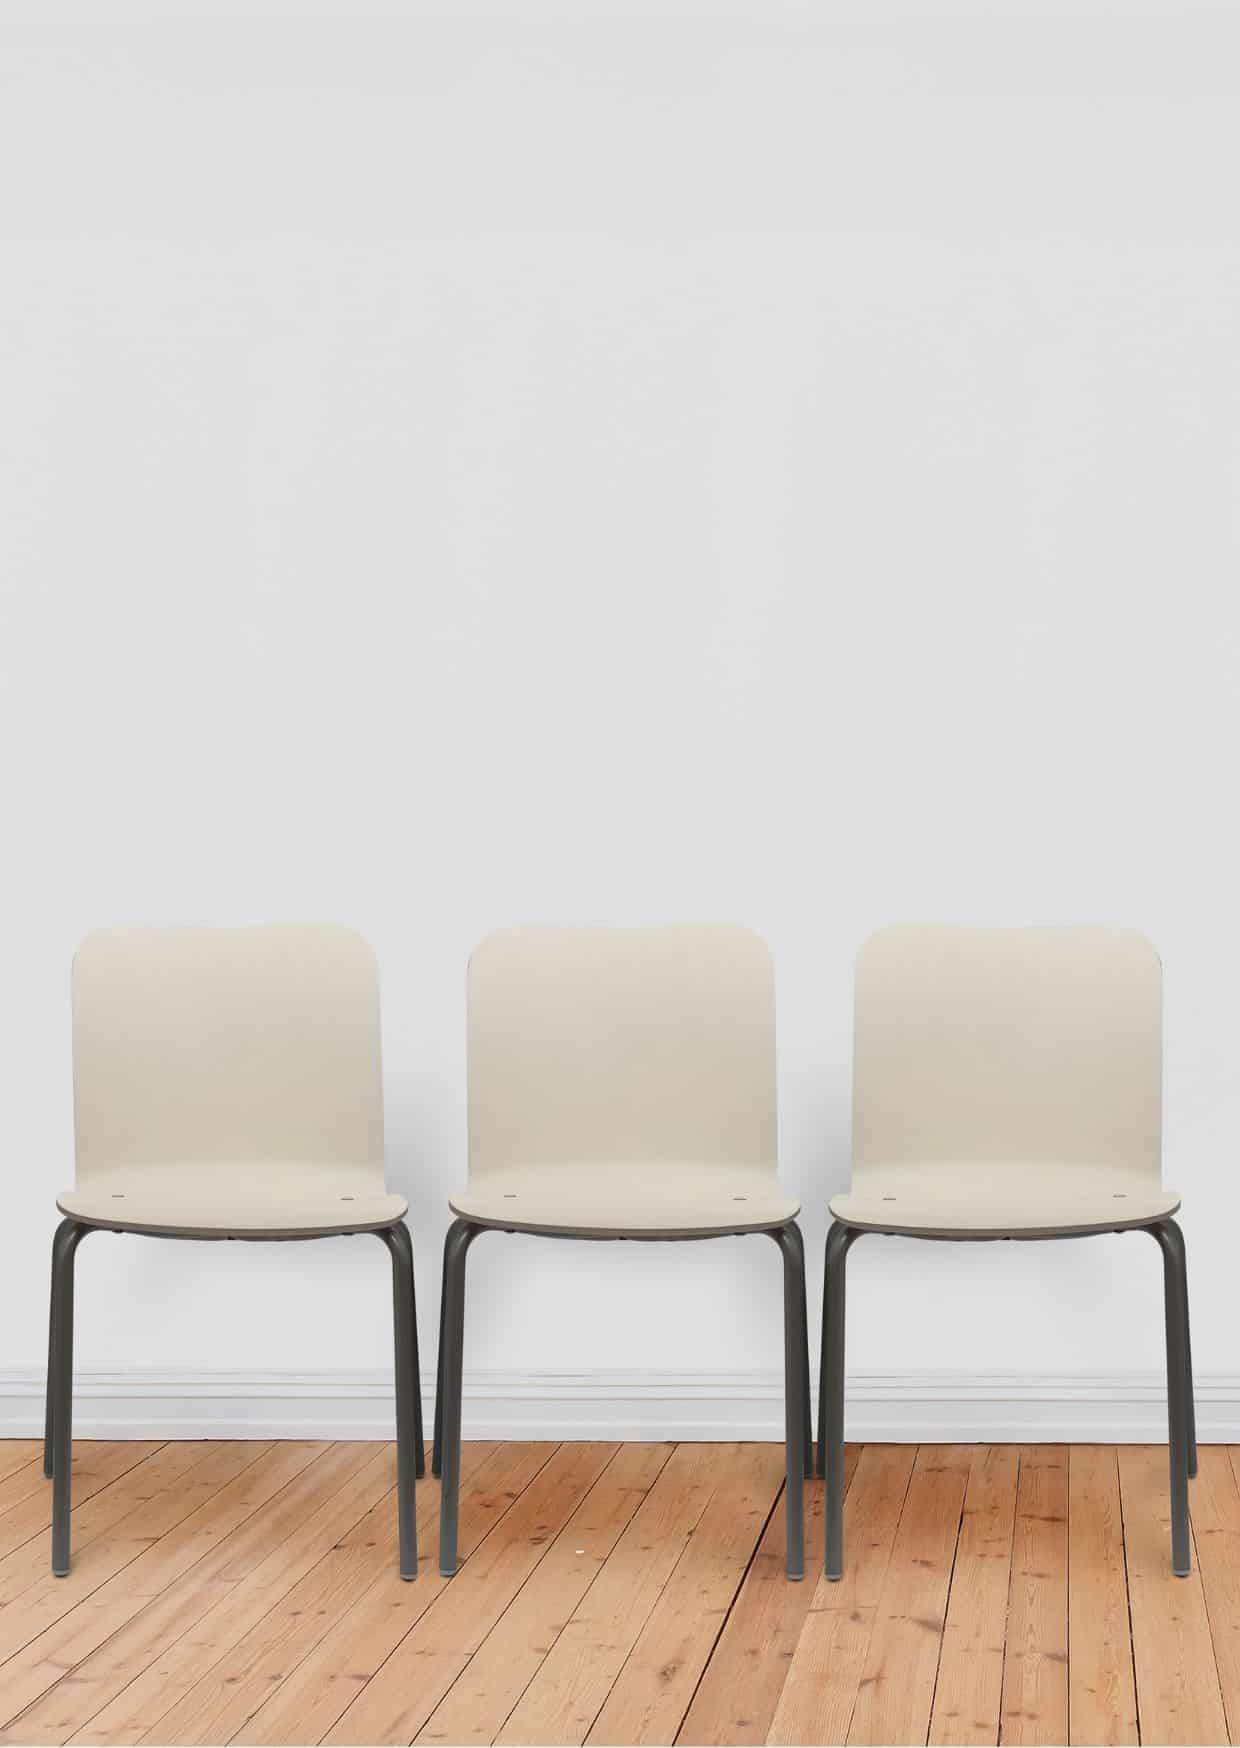 three white chairs with black legs in front of a white wall. The floor is pine parquet.